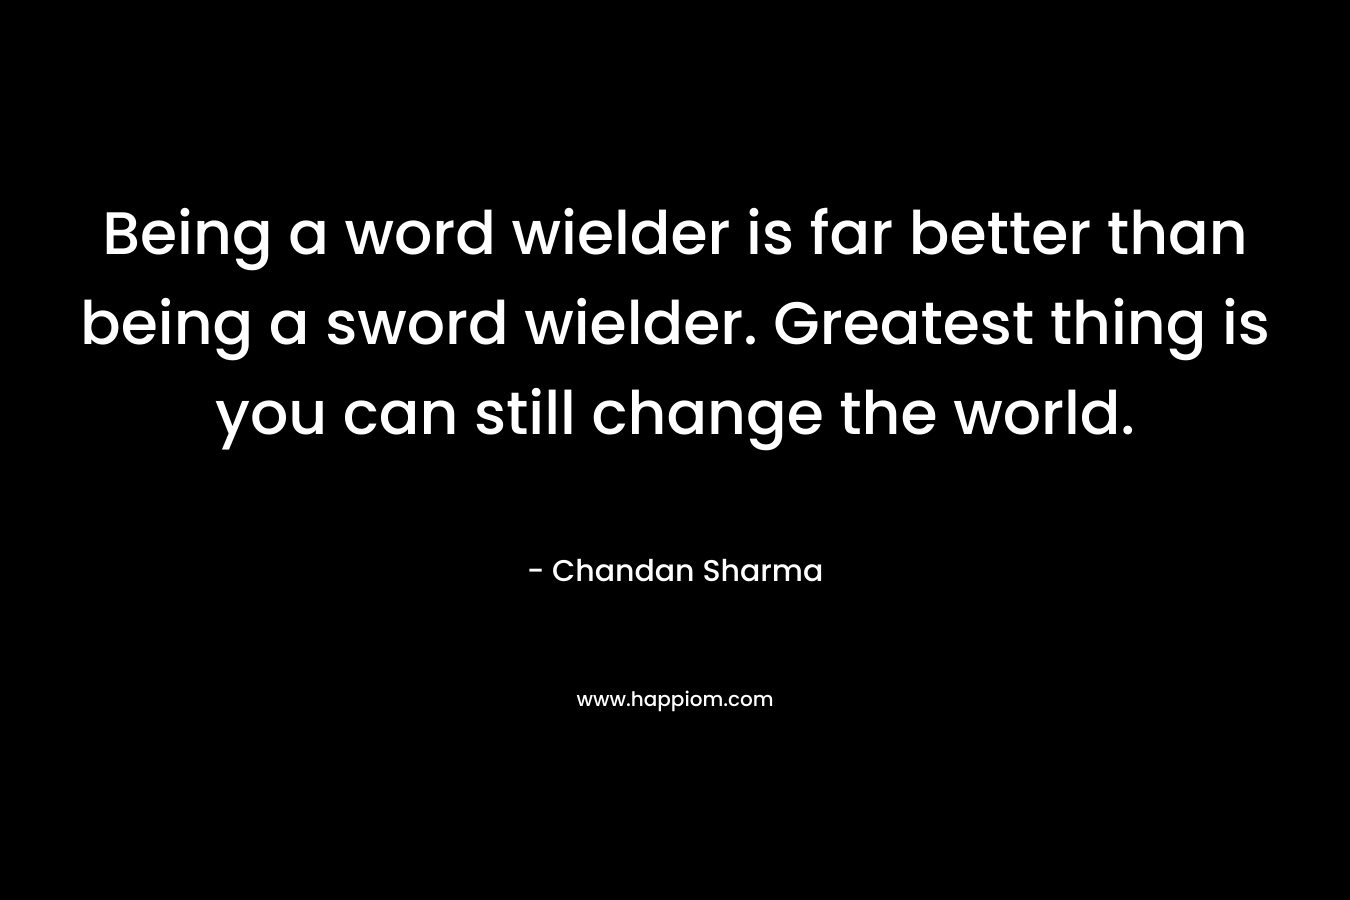 Being a word wielder is far better than being a sword wielder. Greatest thing is you can still change the world. – Chandan Sharma